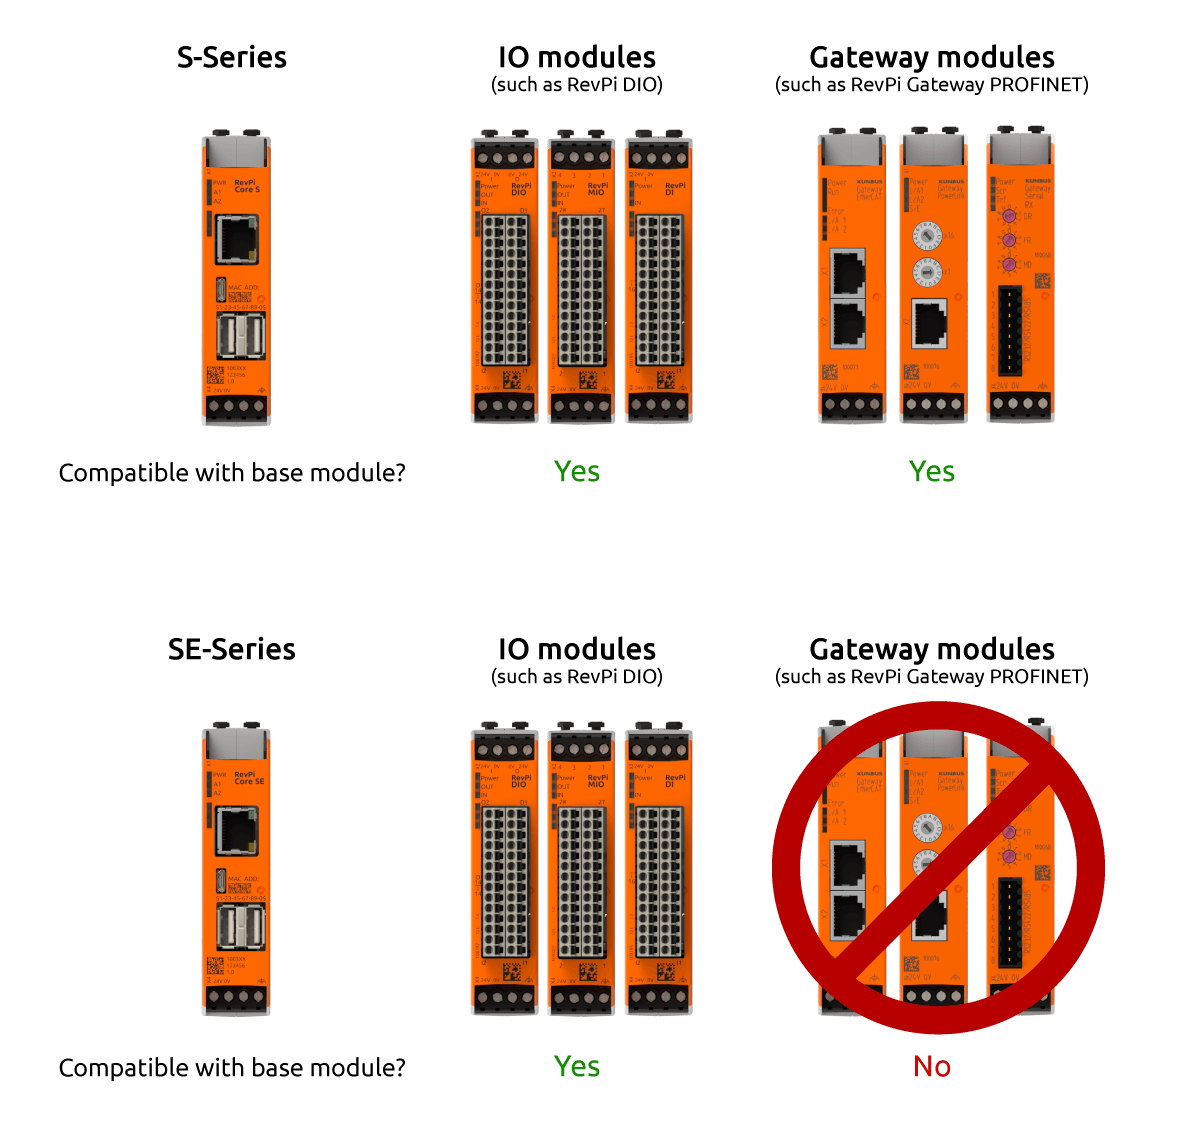 Graphic illustrating the differences between the RevPi S-series and the RevPi SE-series